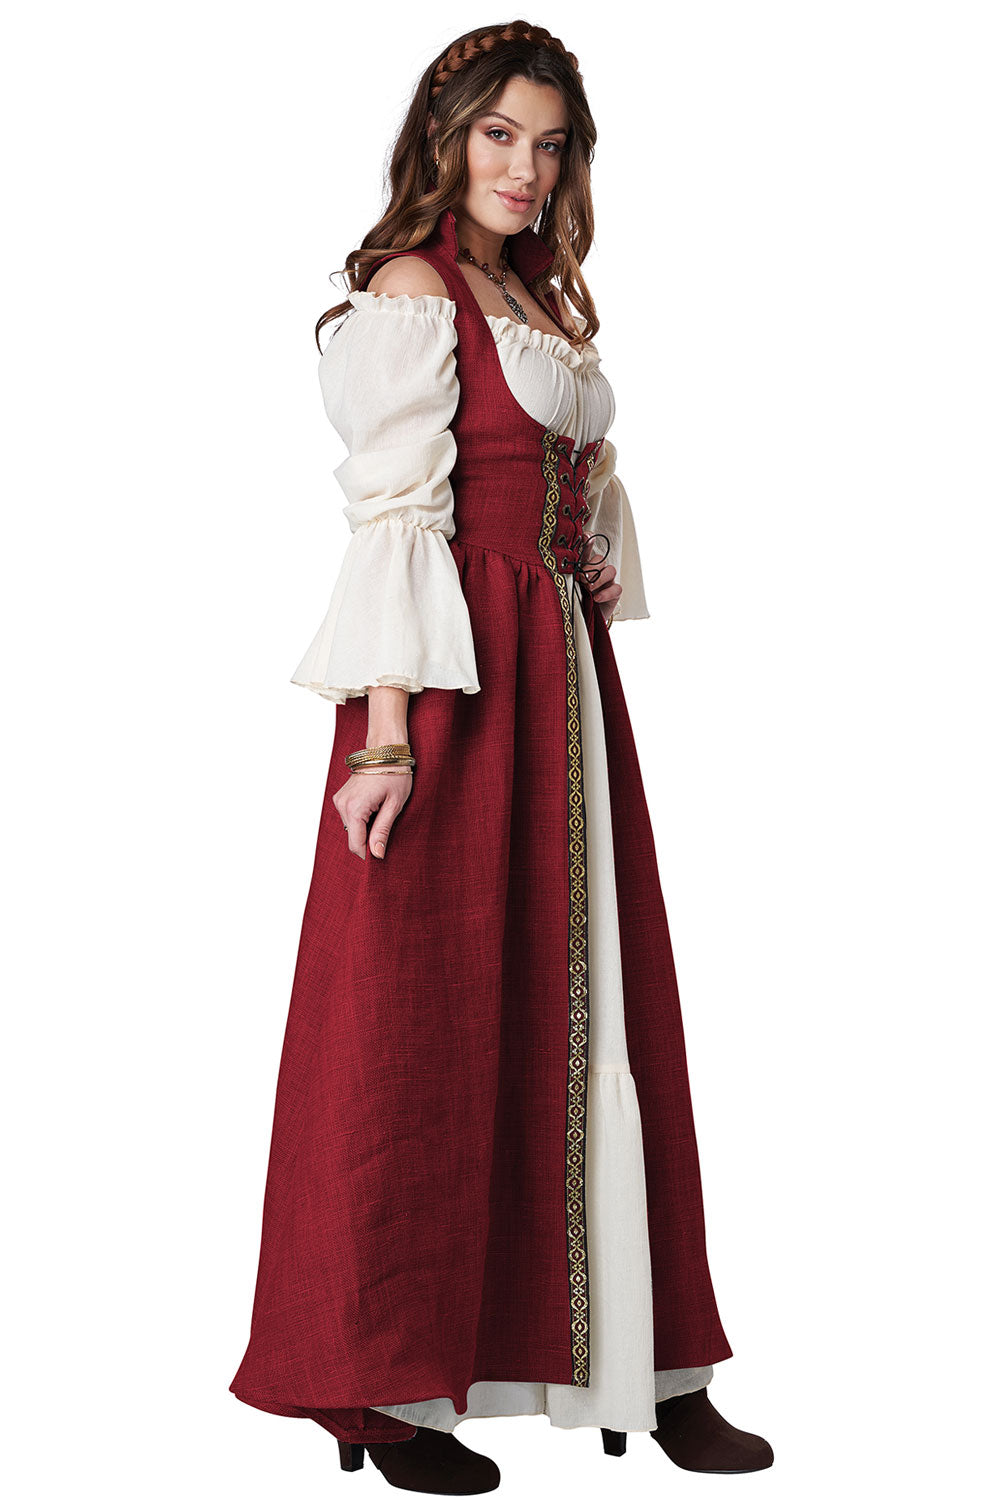 Medieval Overdress / Adult California Costume  5020/036